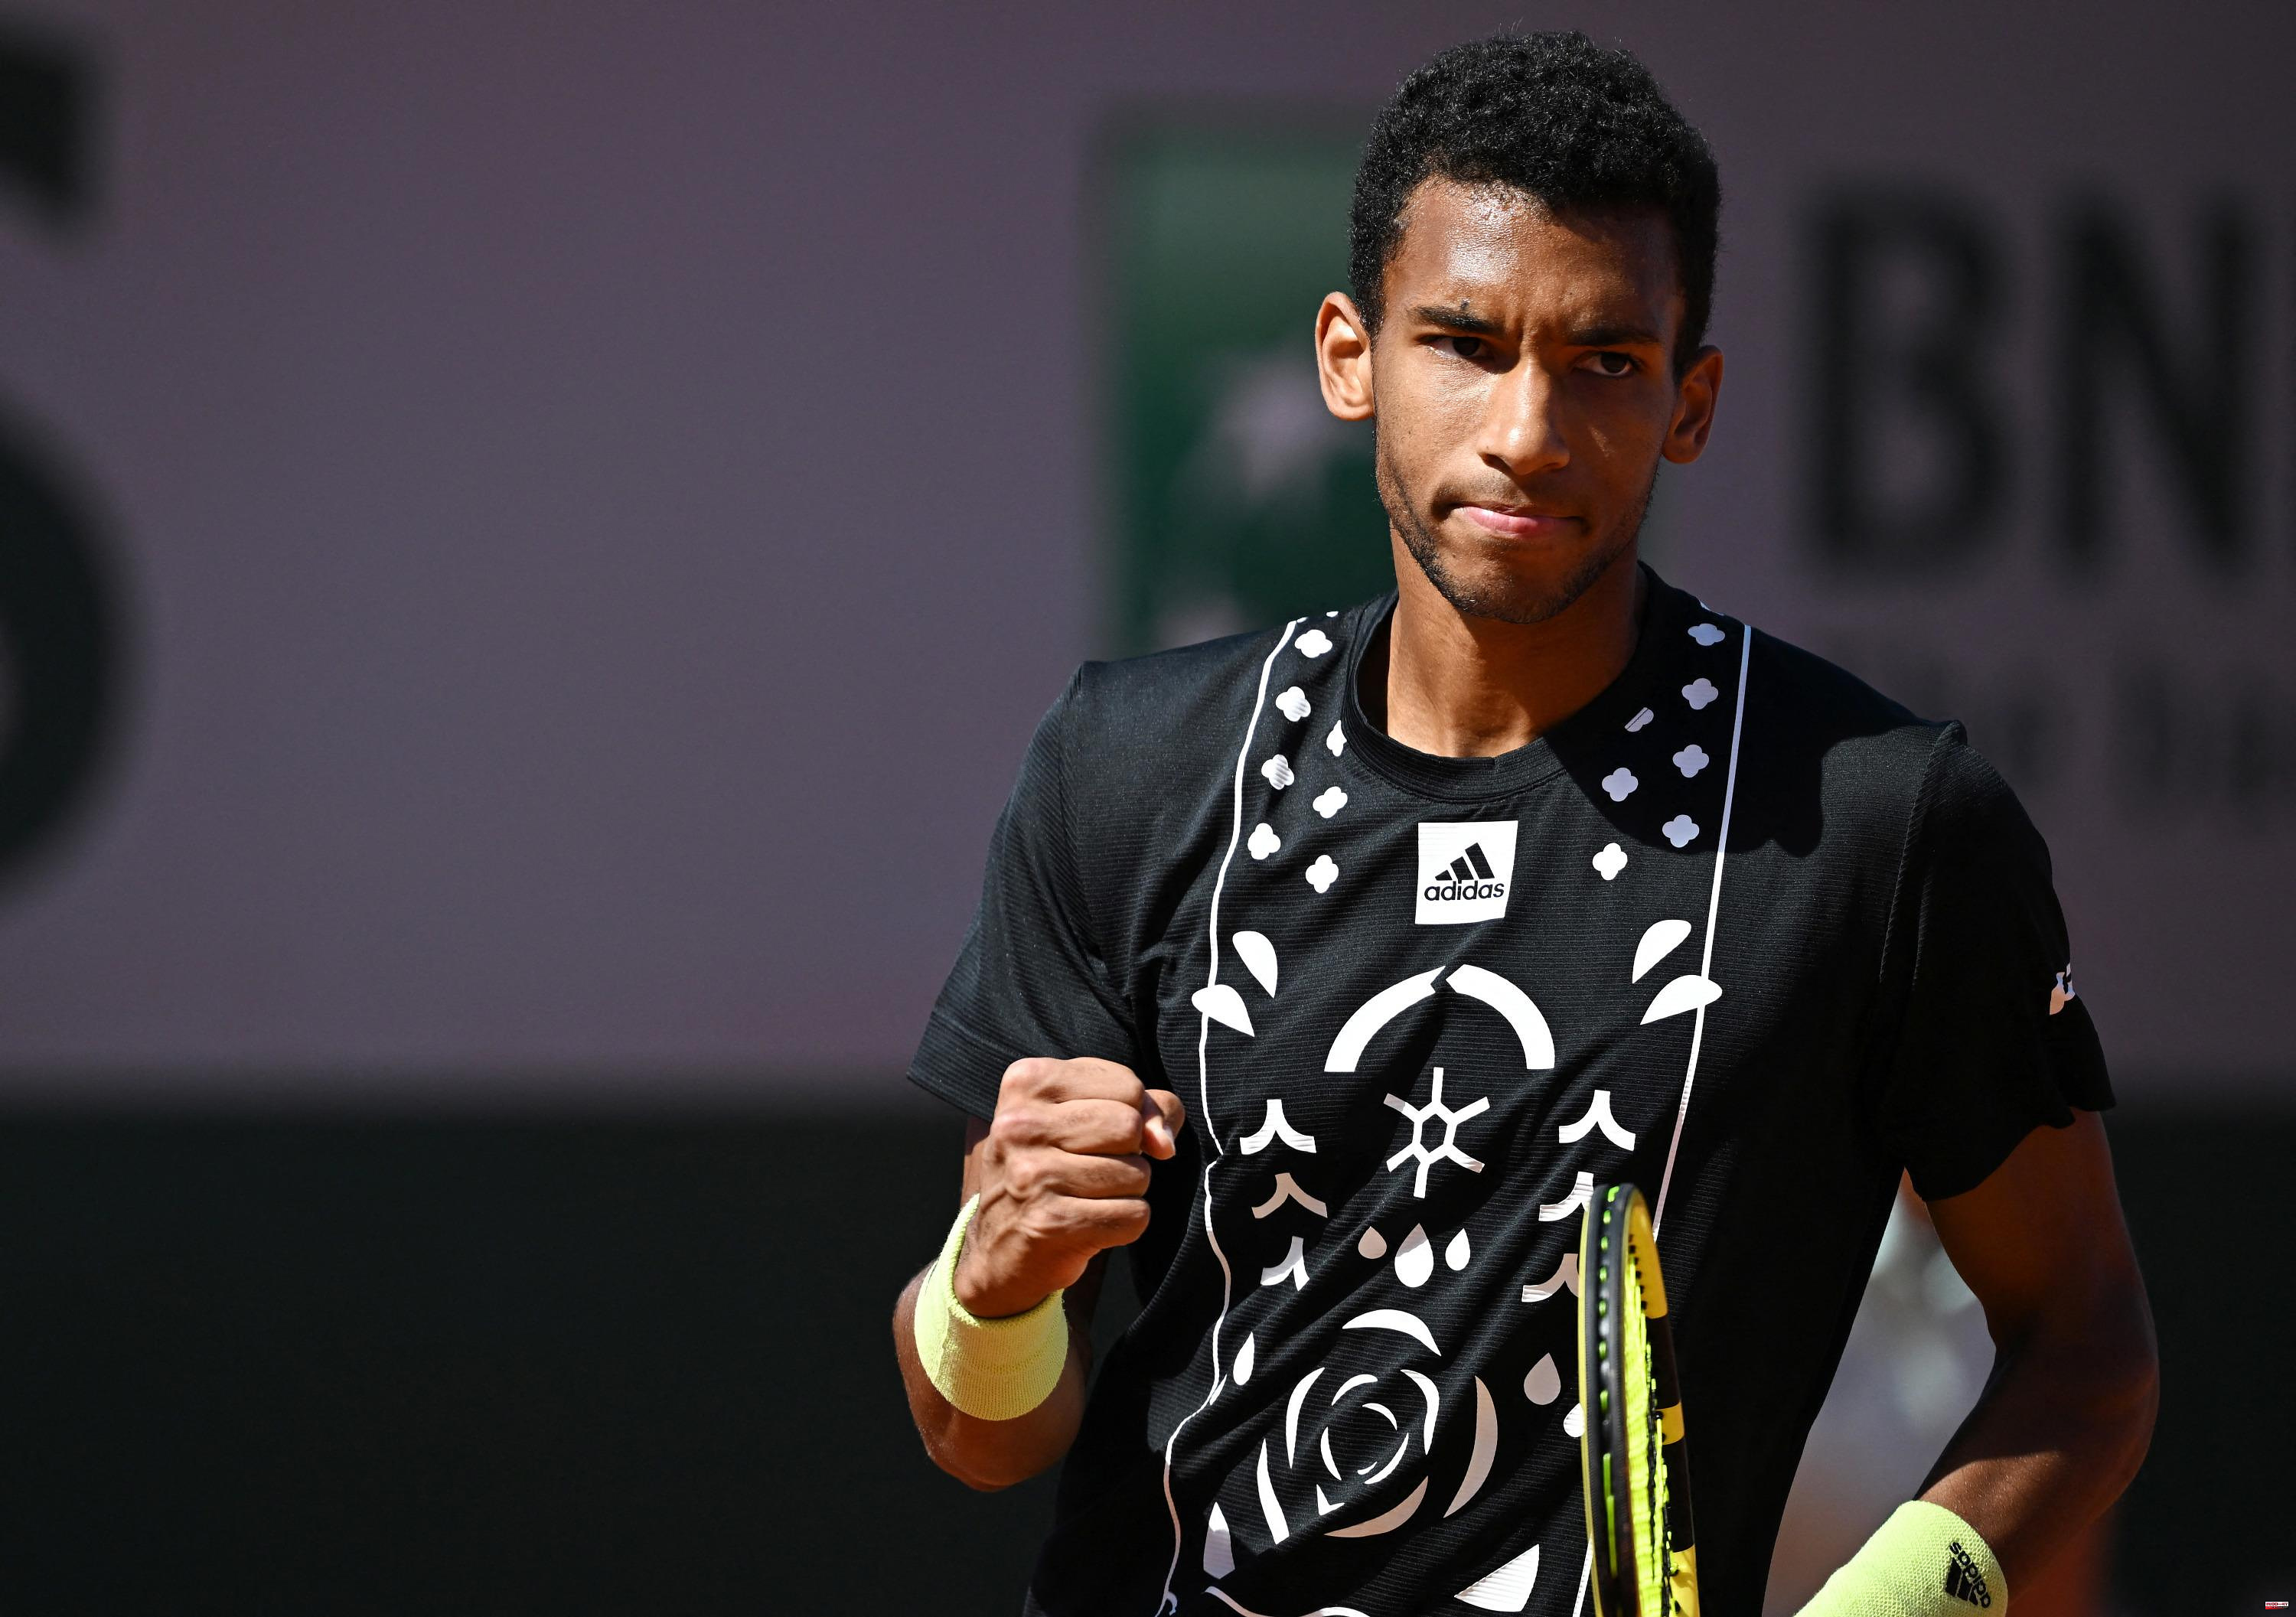 Roland-Garros: after a first match in five sets, Auger-Aliassime does not lag behind in the 2nd round